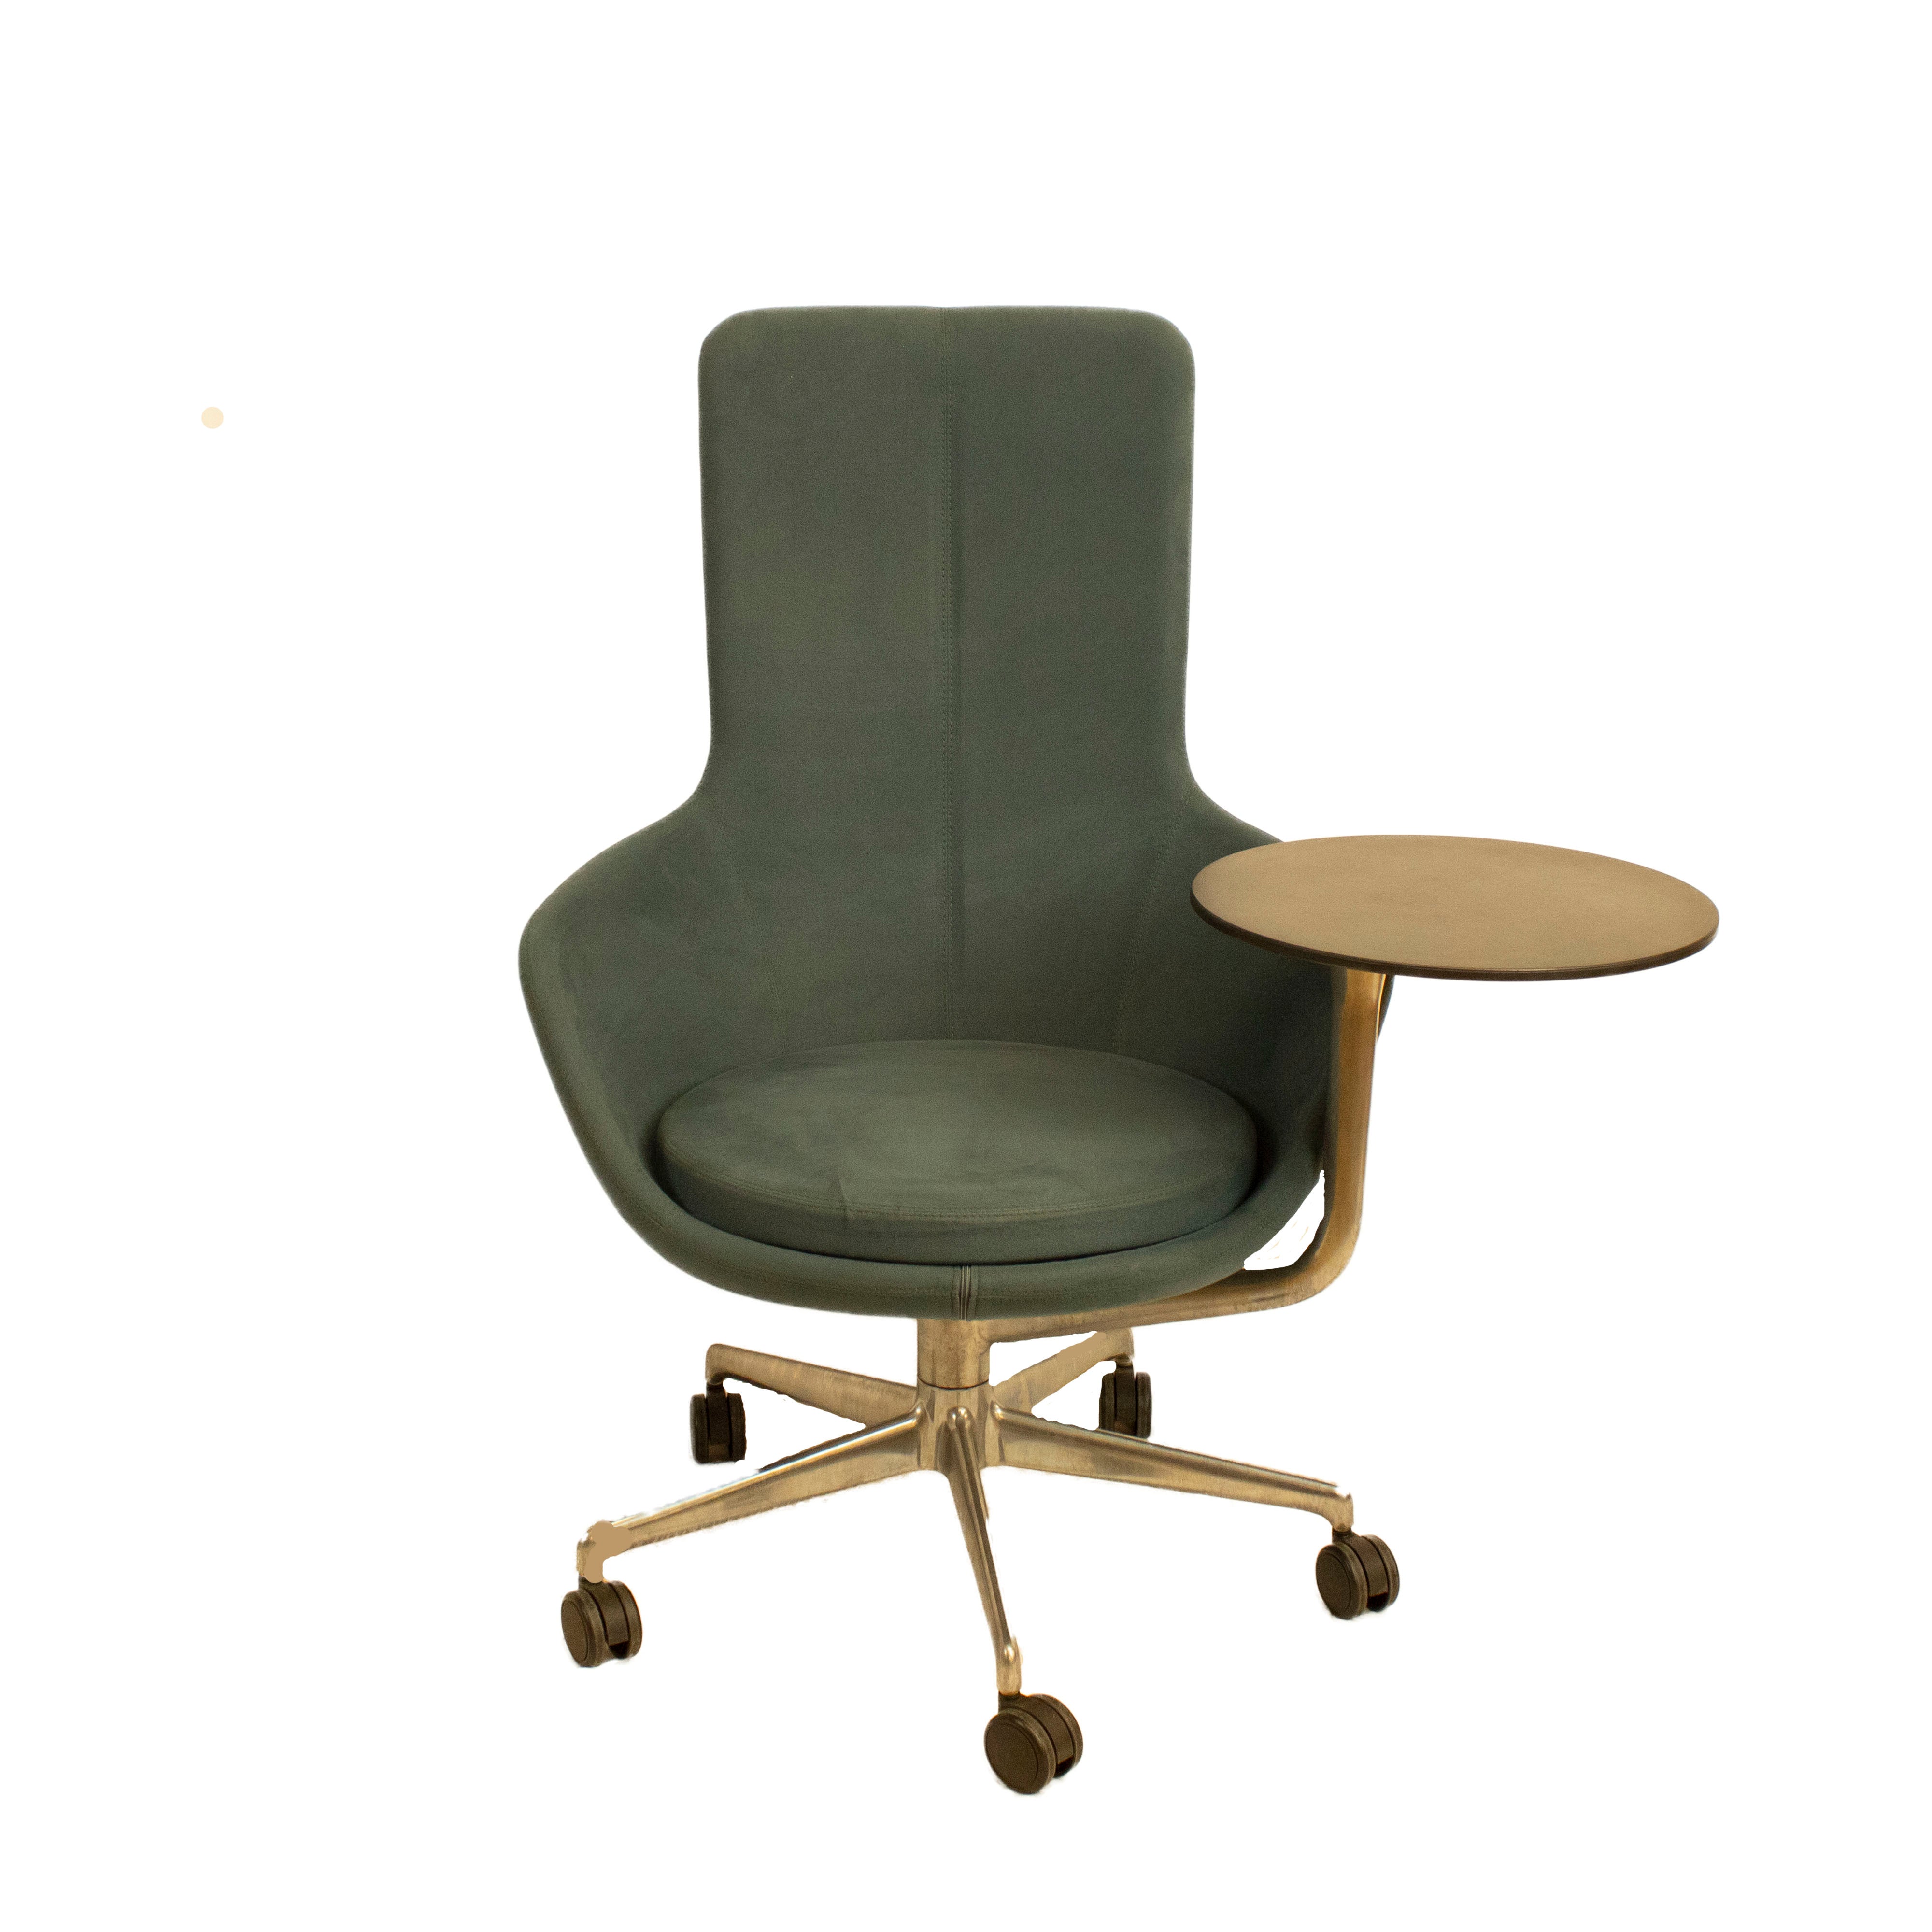 Keilhauer Juxta Lounge Chair - Preowned